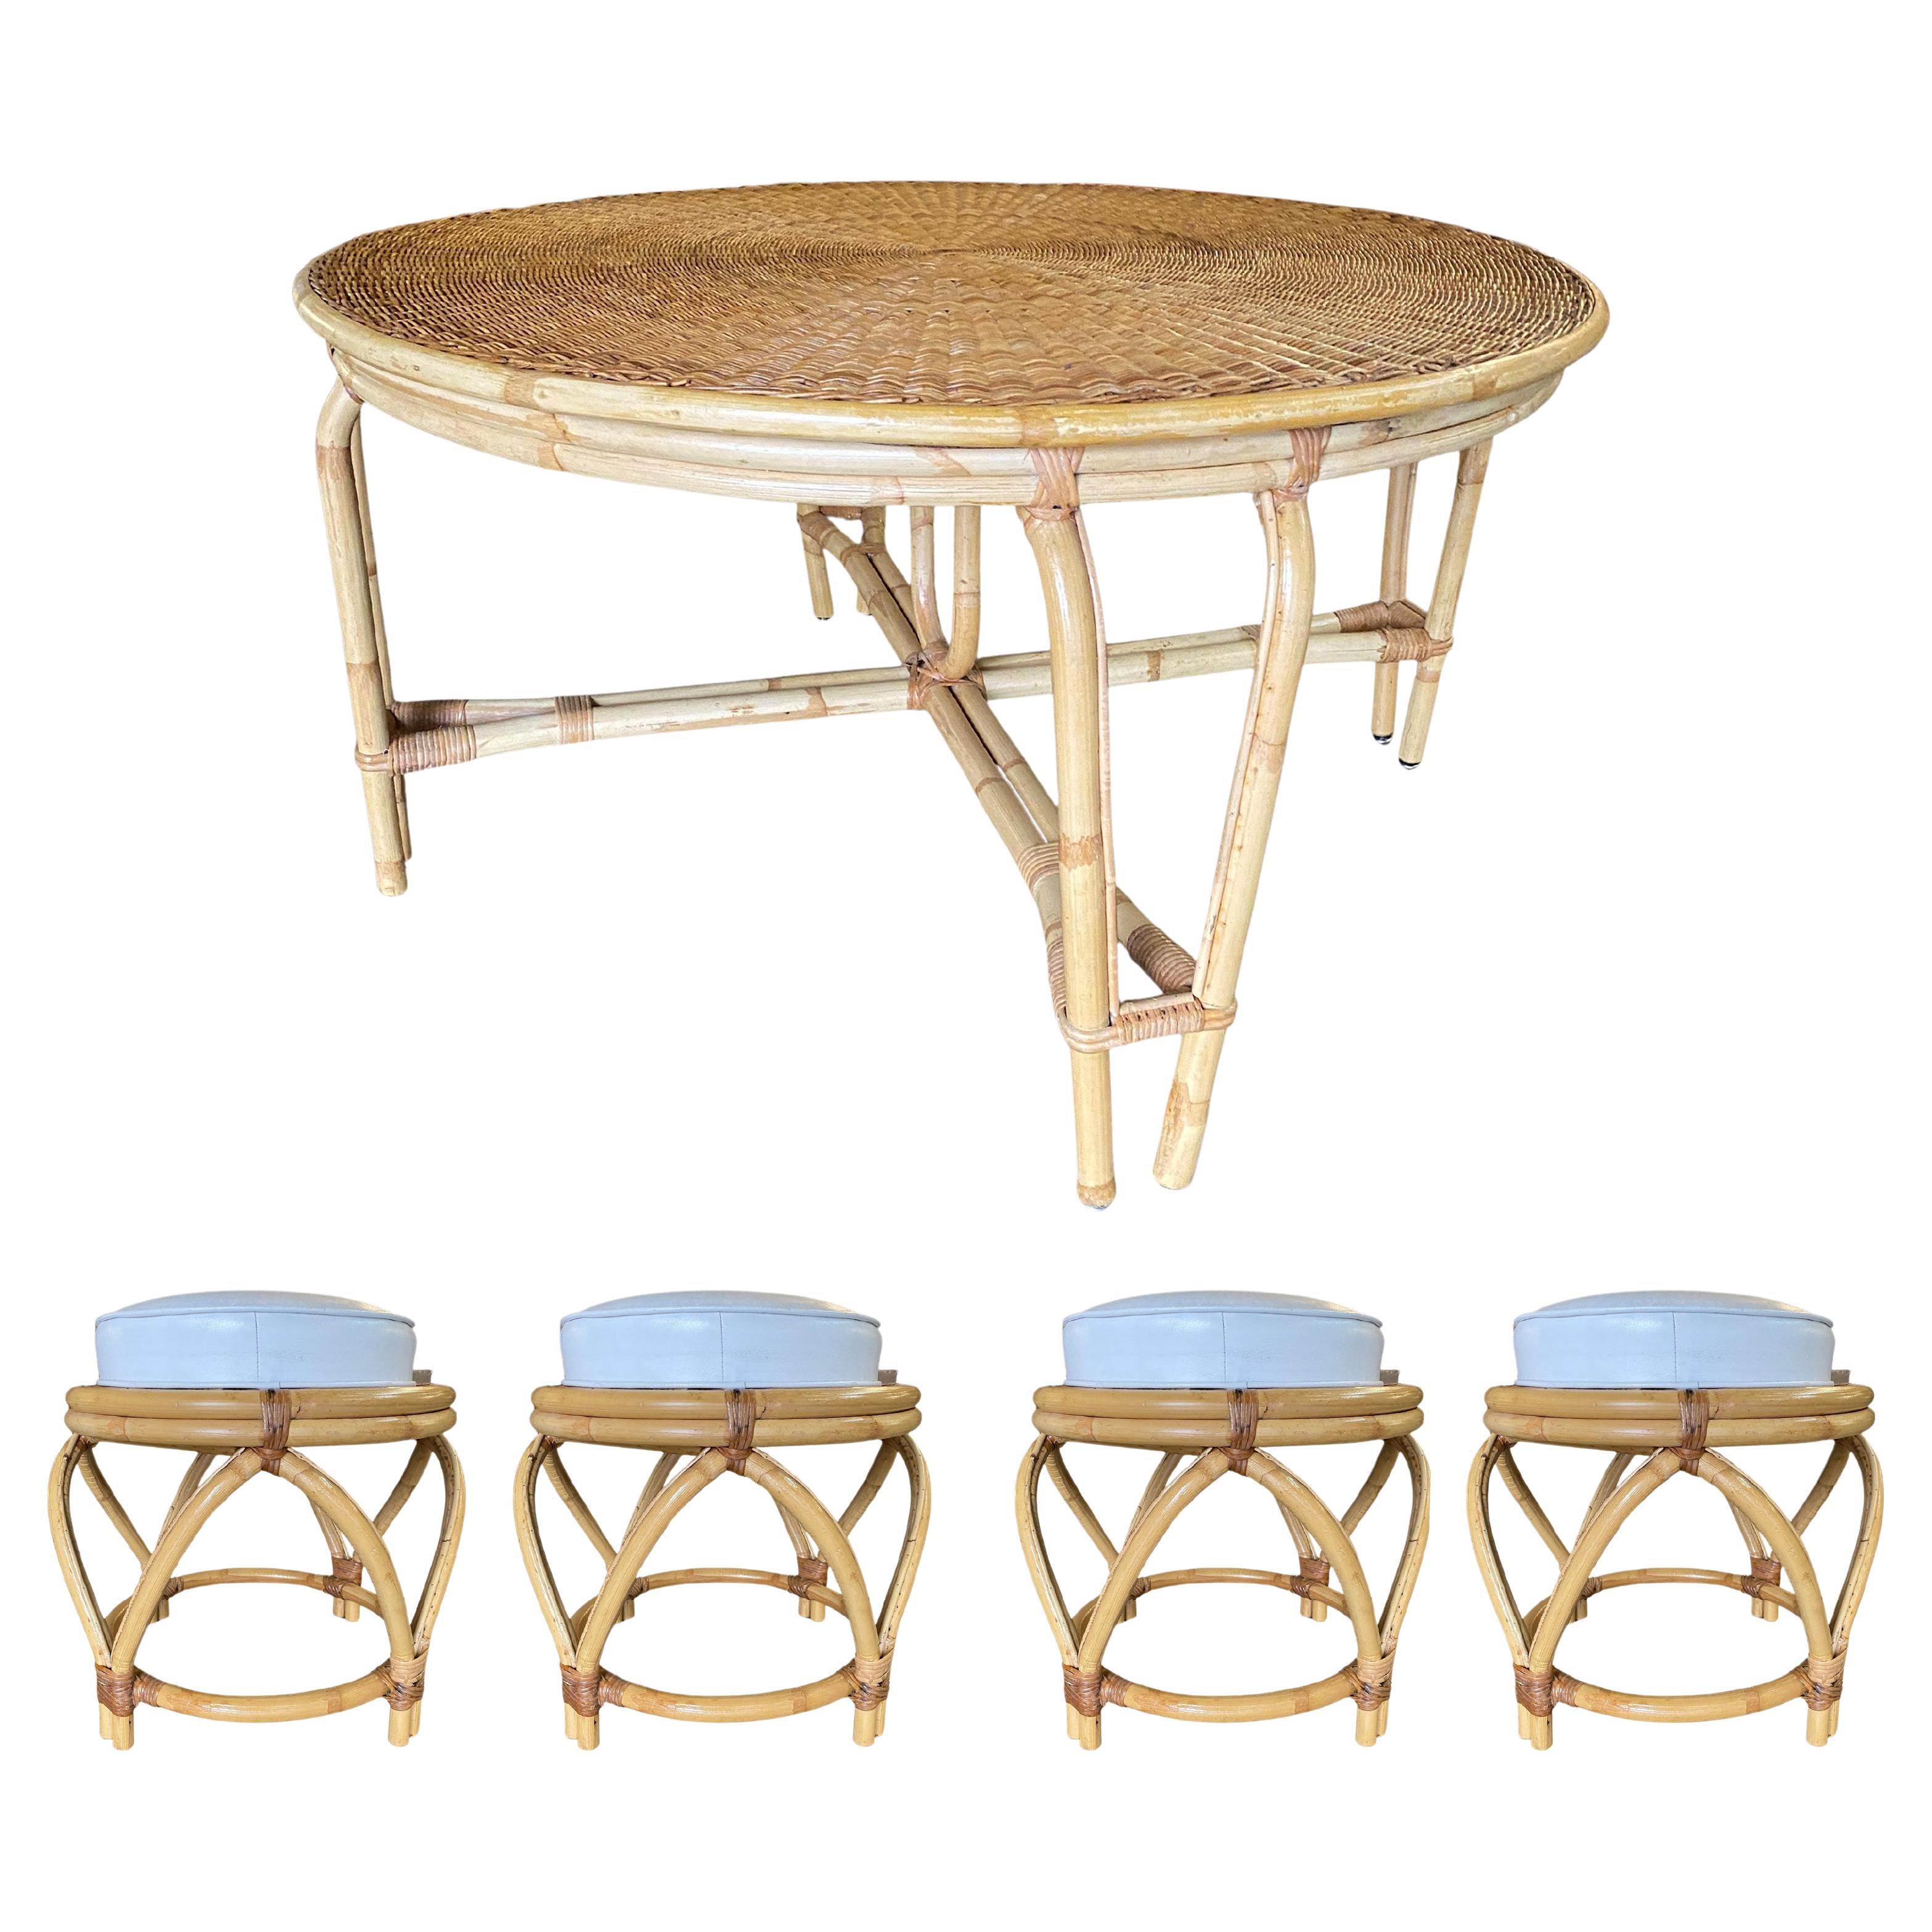 Round Wicker Top Rattan Table w/ Matching Stools Dining Set